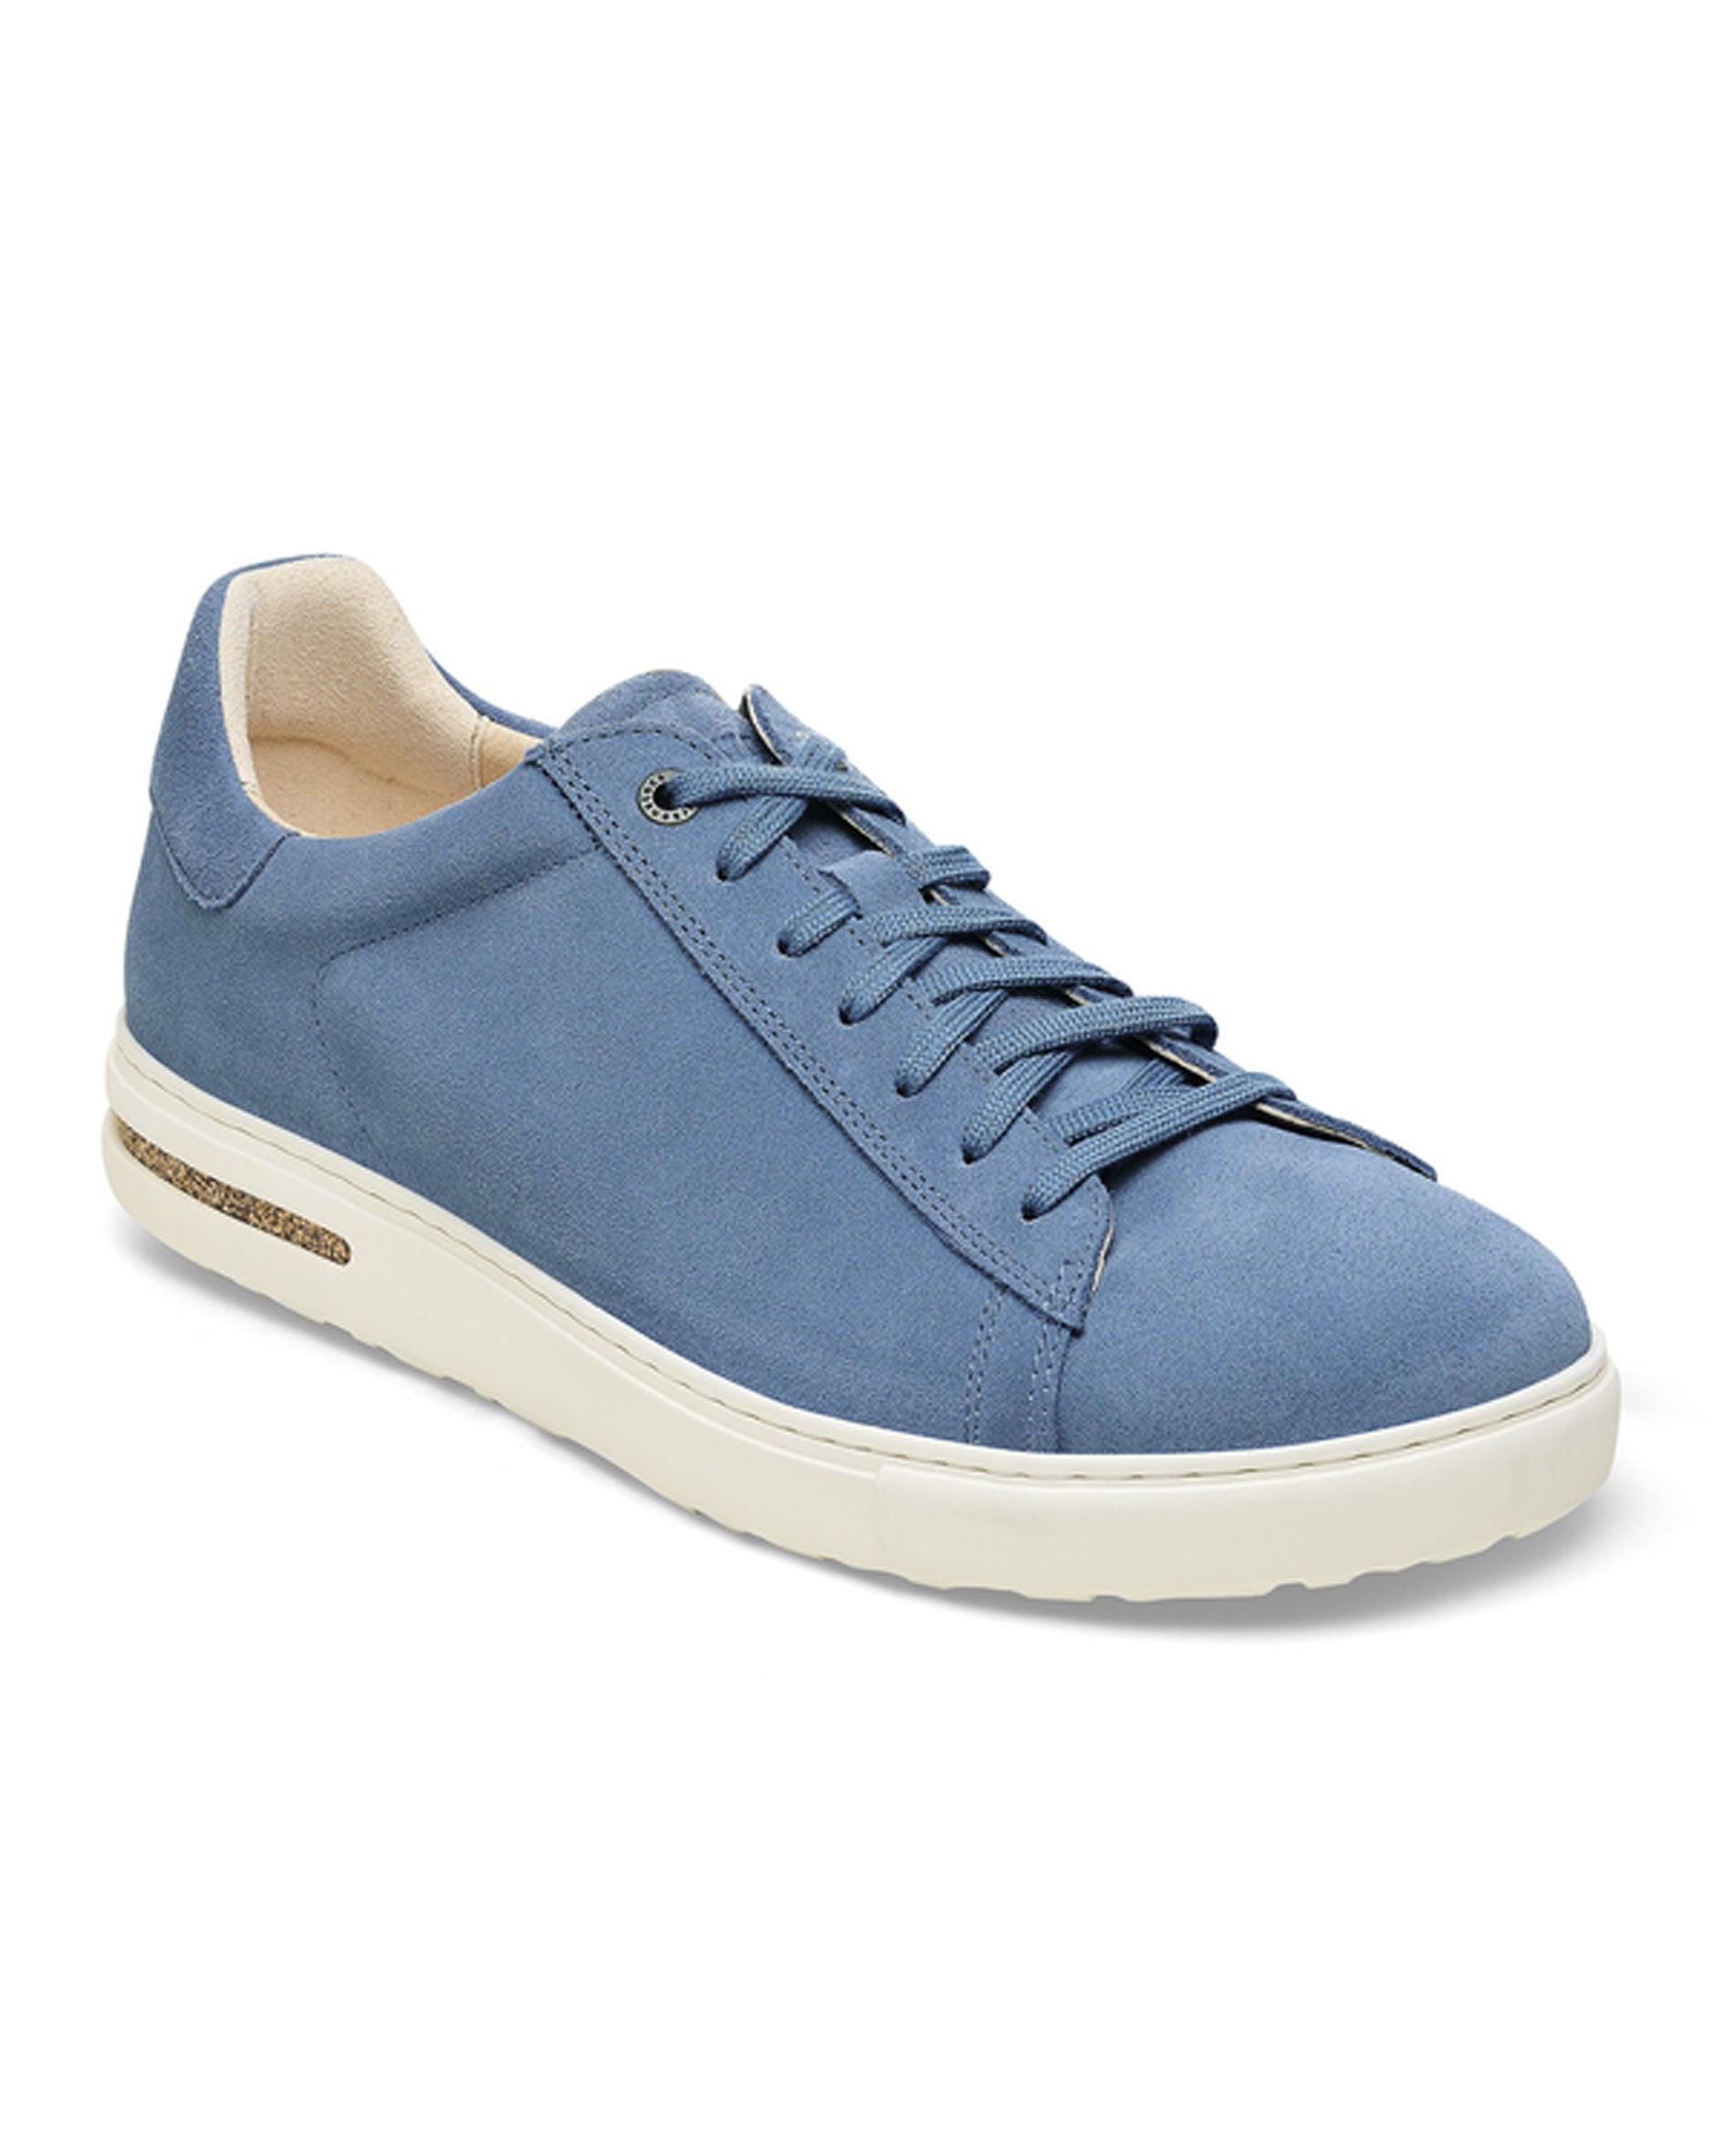 Bend Low Elemental Blue Suede Leather Shoes